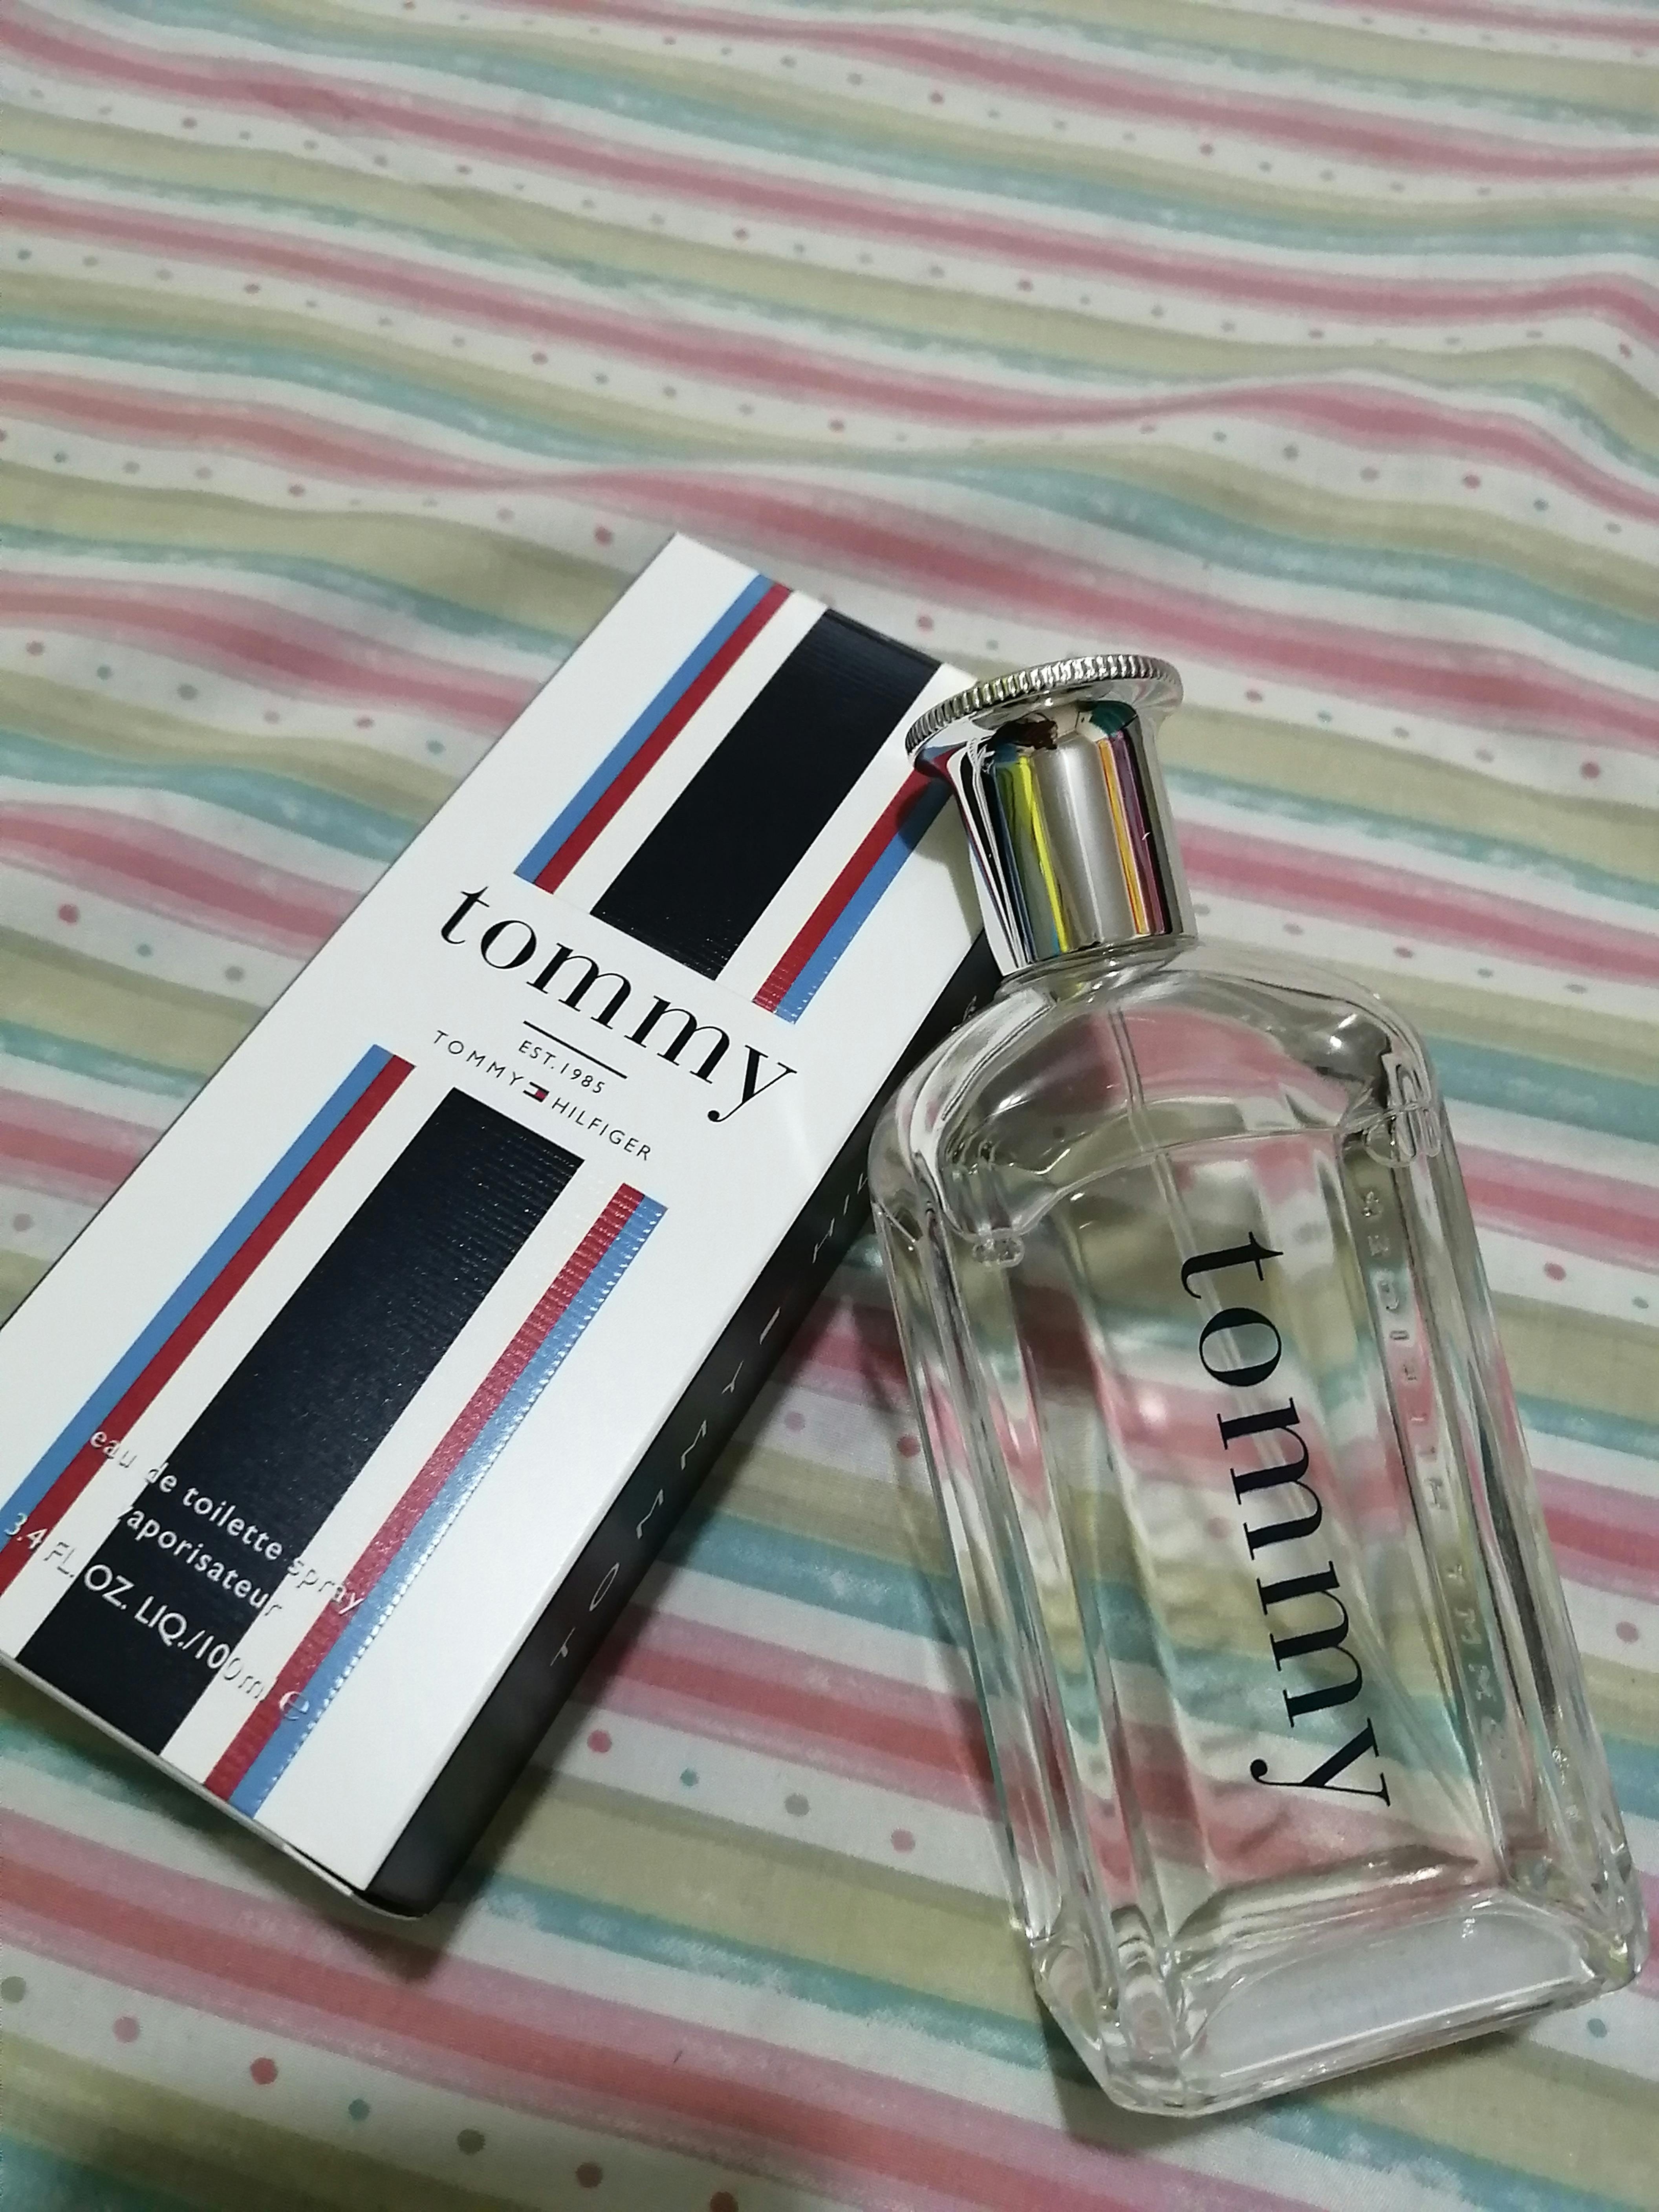 tommy hilfiger cologne spray review